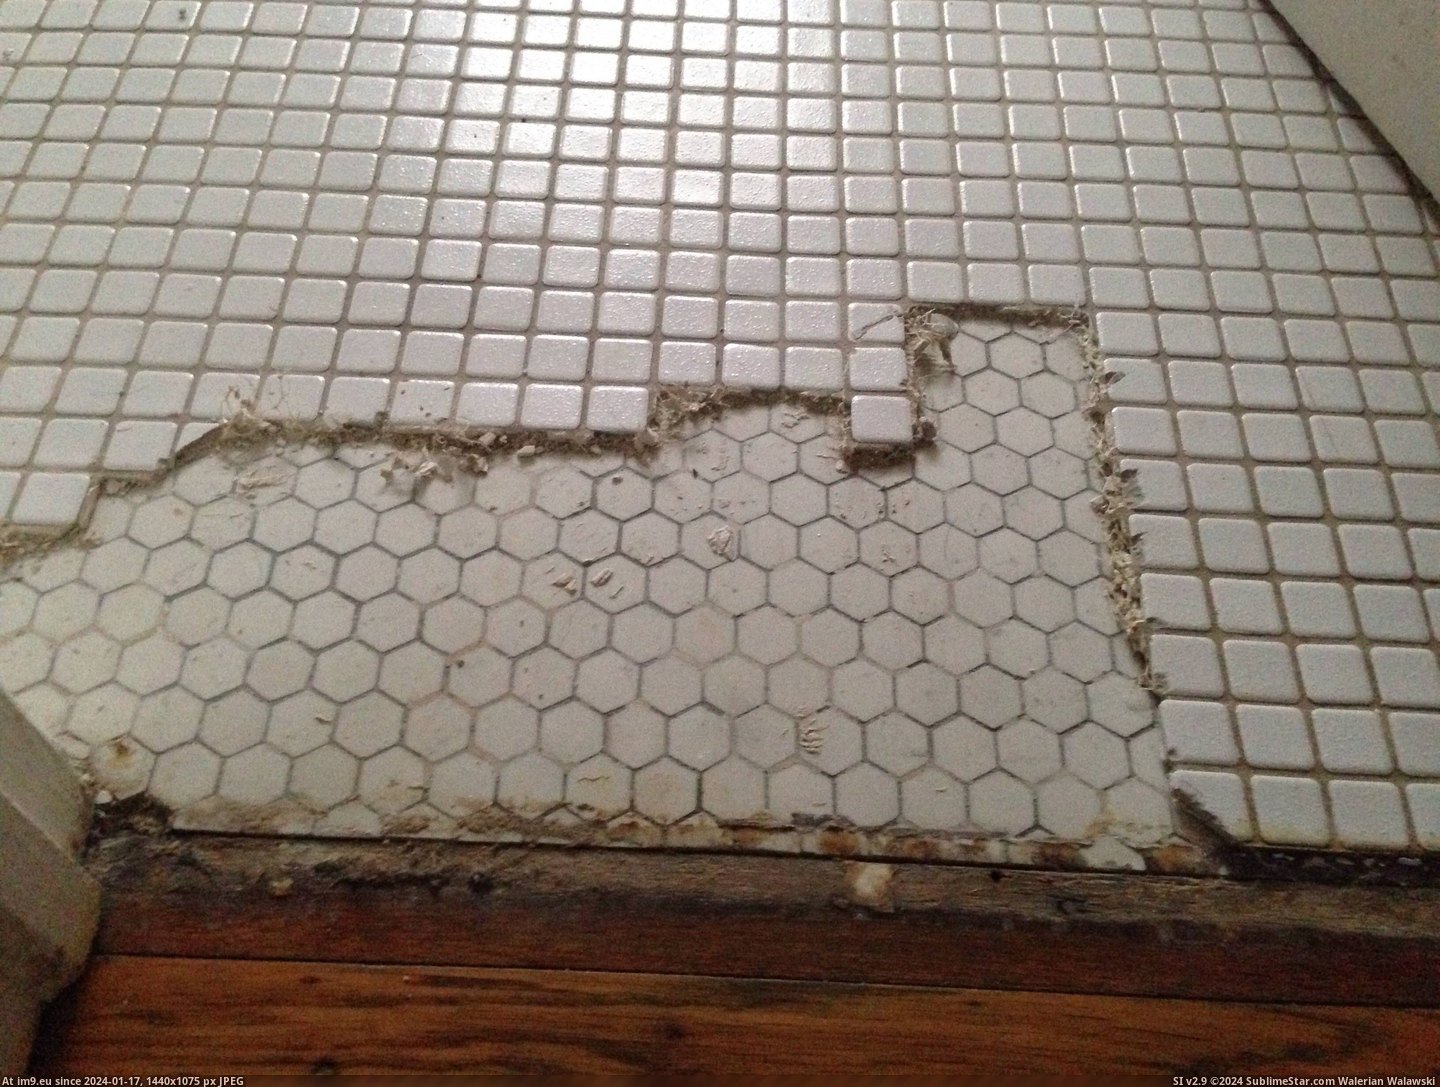 #Time #Wife #Wanted #Tile #Hexagon #Bathroom #Hour #1920s [Pics] My wife and I wanted to redo our 1920s bathroom with more time-appropriate hexagon tile. An hour in, I see this. Pic. (Bild von album My r/PICS favs))